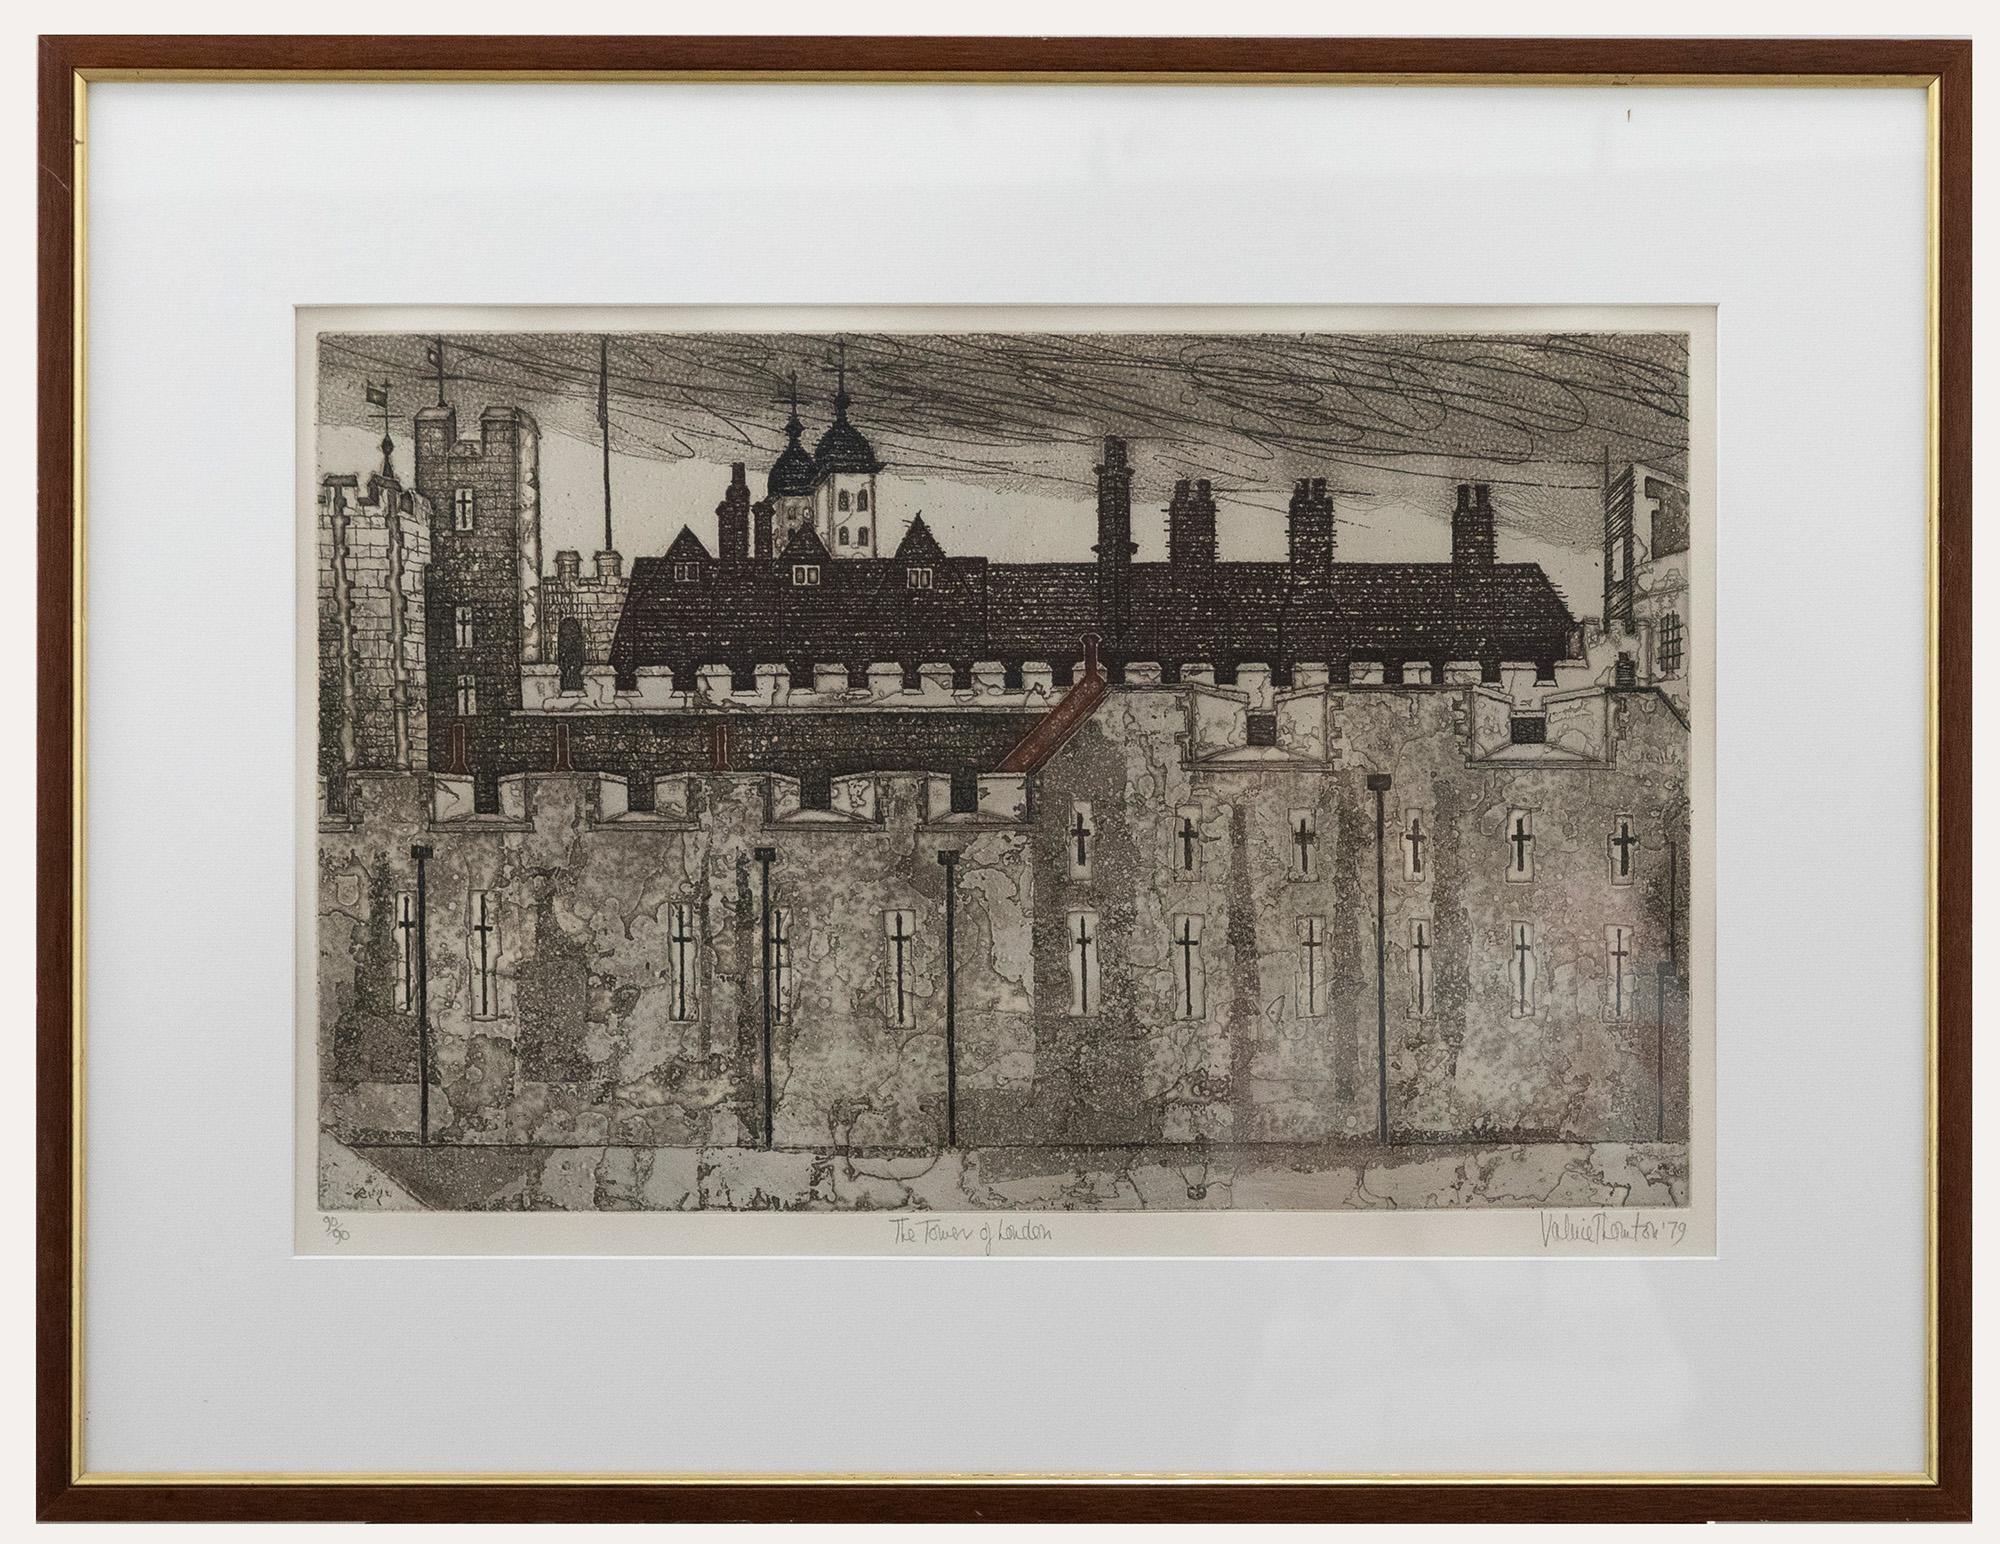 Unknown Landscape Print - Valerie Thornton (1931-1991) - Framed 20th Century Aquatint, The Tower of London